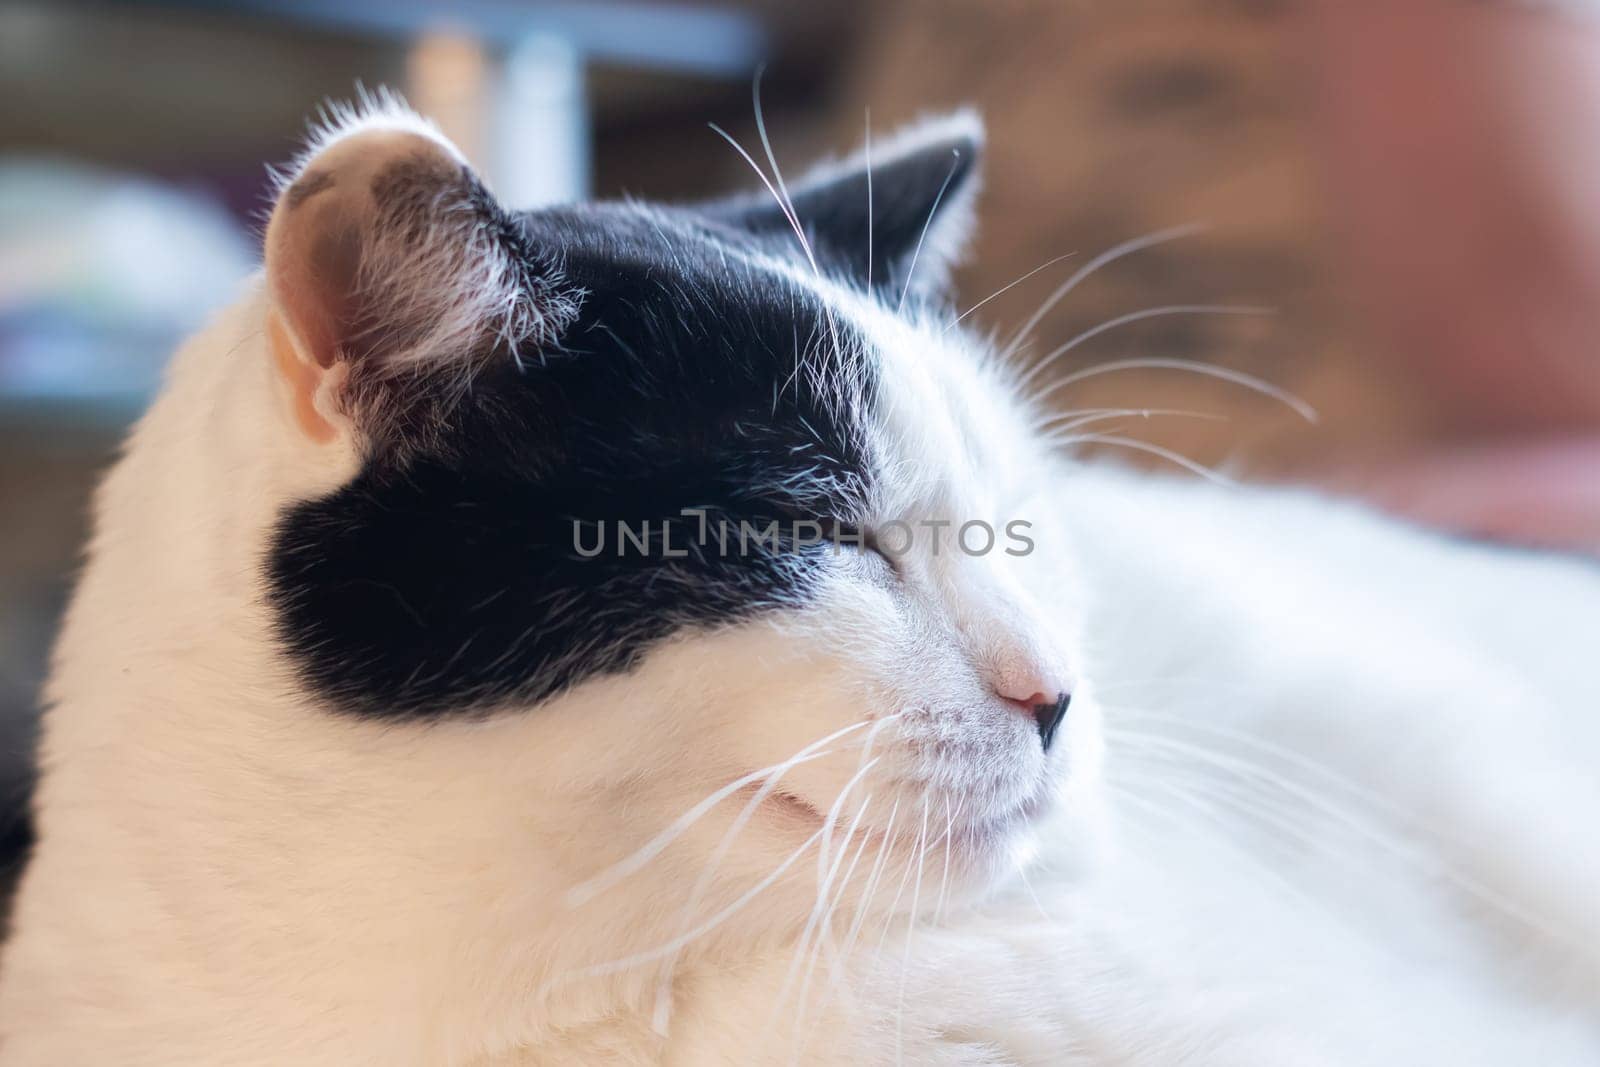 Black and white cat at home closeup portrait by Vera1703